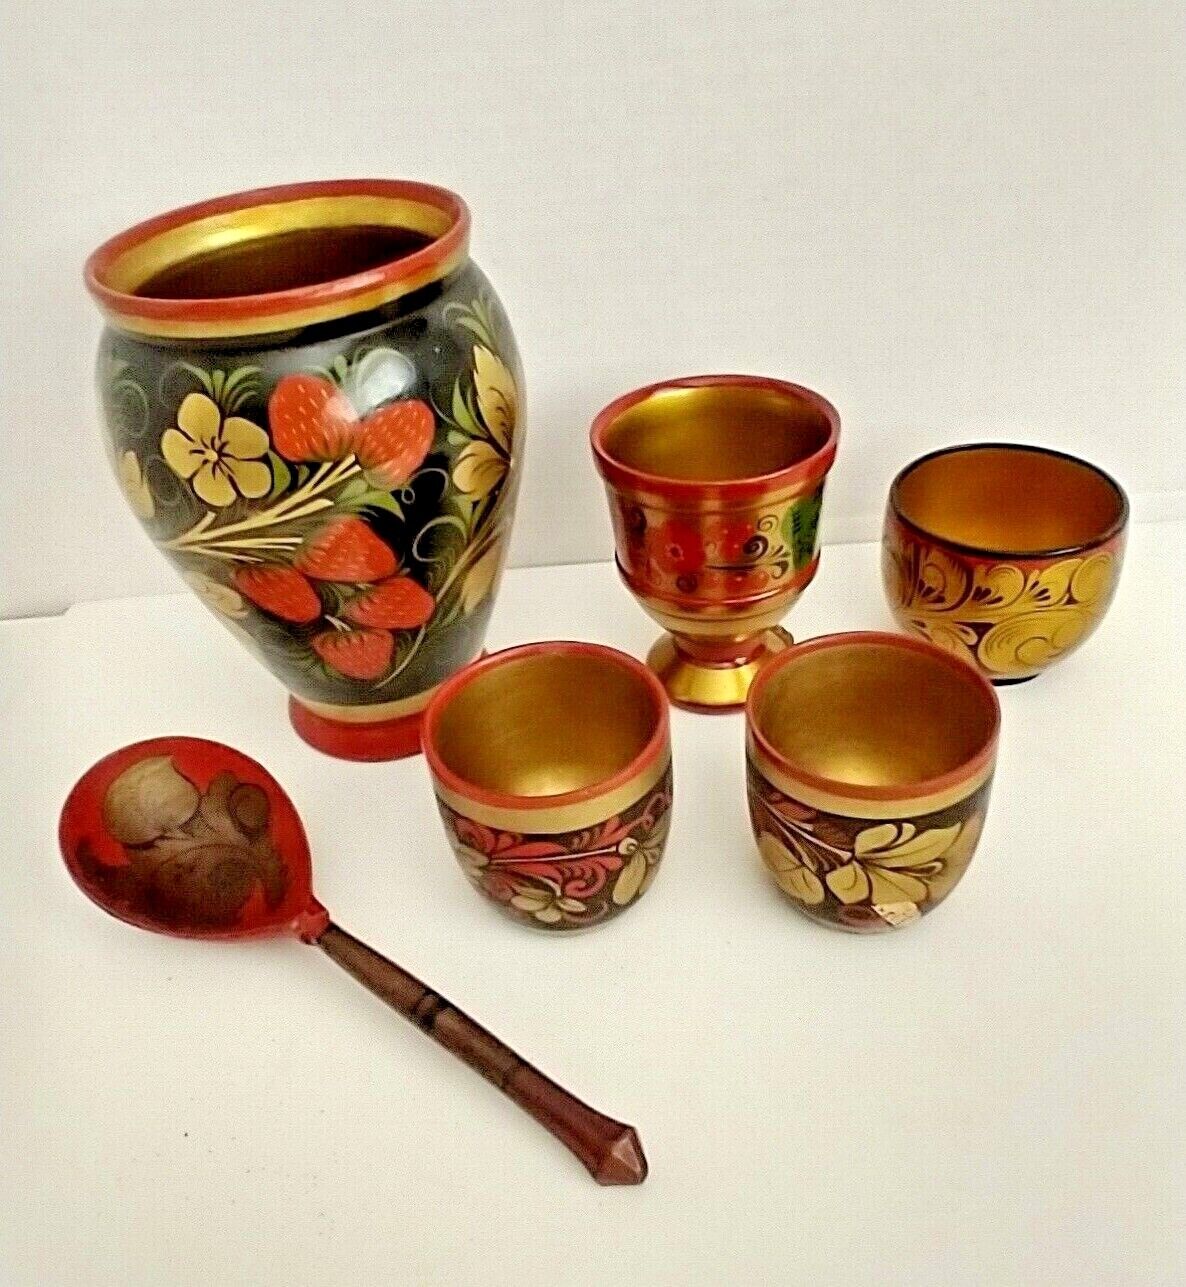  LOT 6 Russian Khokhloma hand painted Lacquered wood urn cups spoon